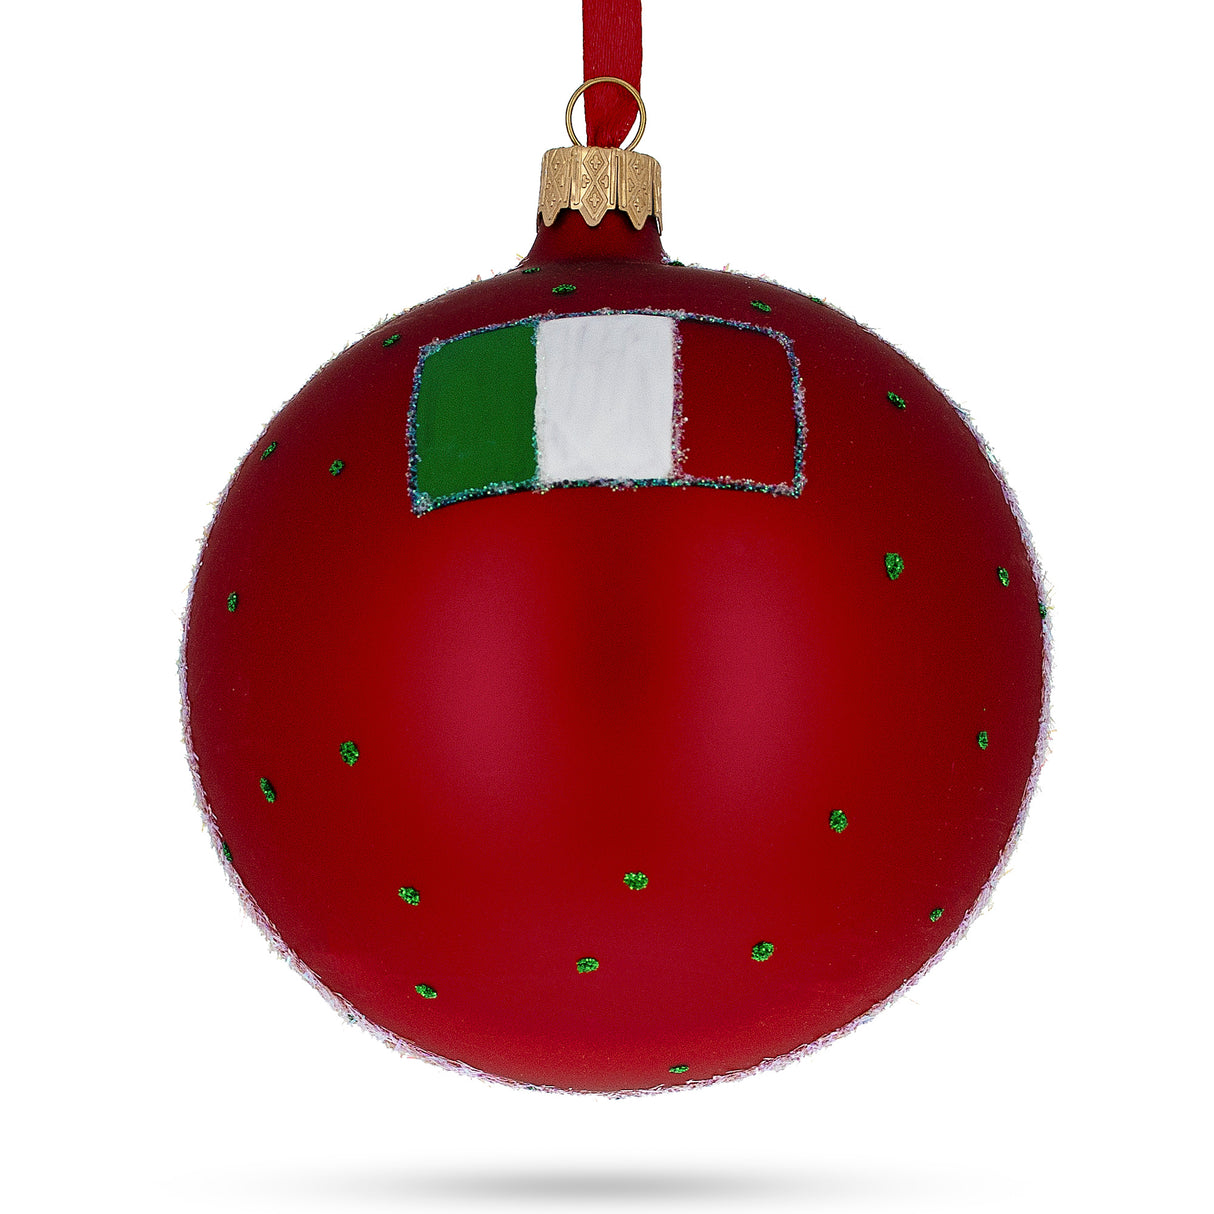 Buy Christmas Ornaments Travel Europe Italy by BestPysanky Online Gift Ship